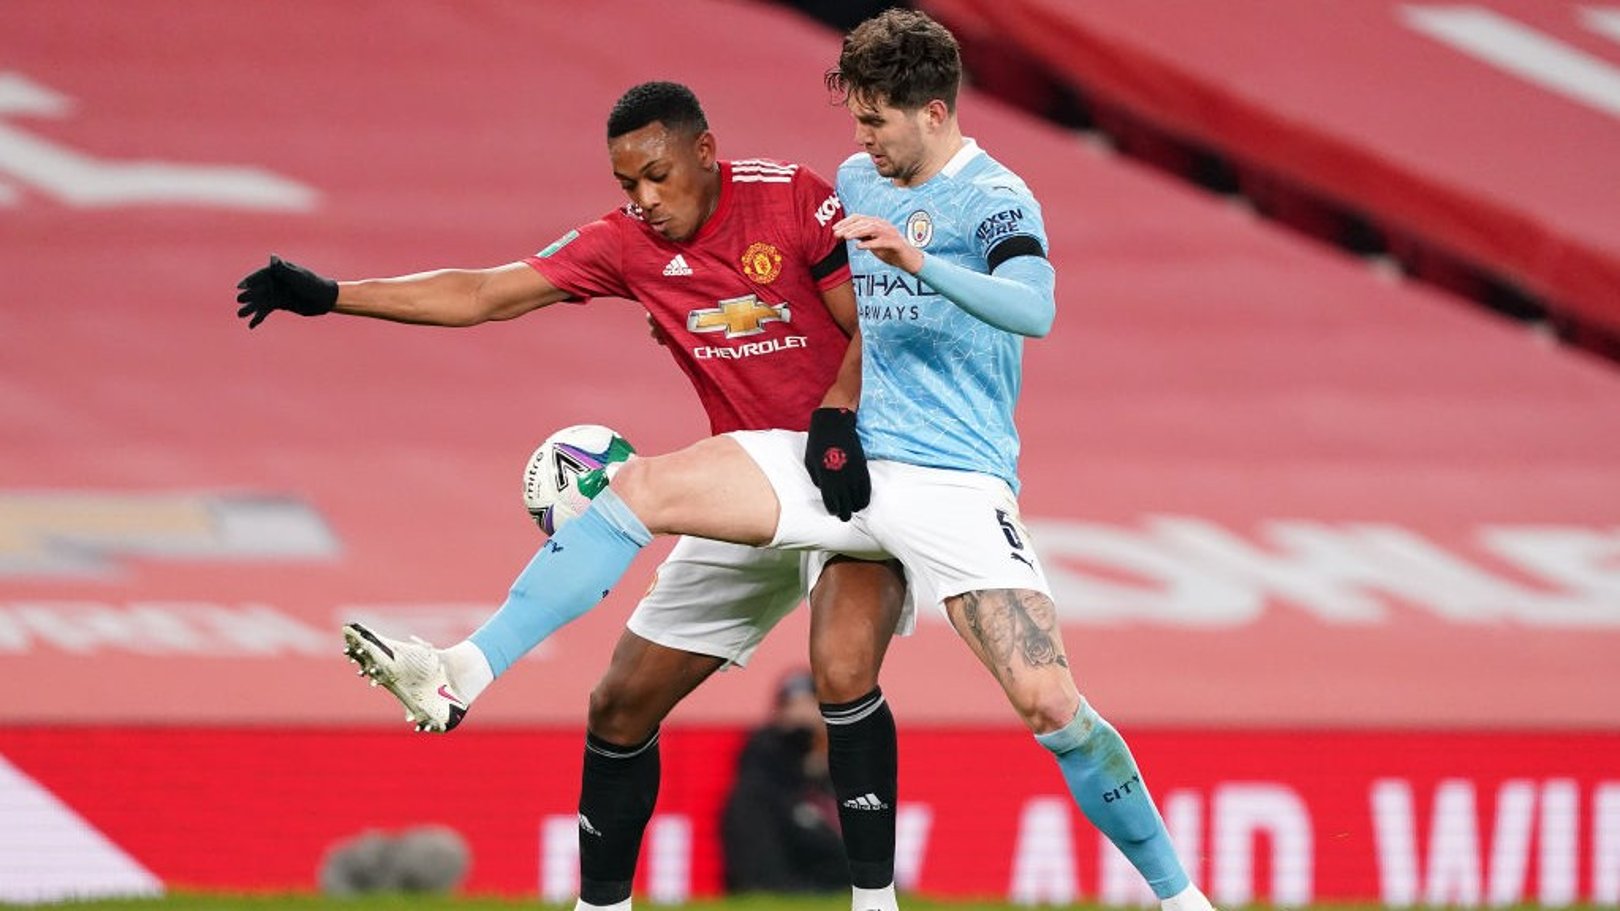 SOLID STONES: John Stones gets the better of Anthony Martial